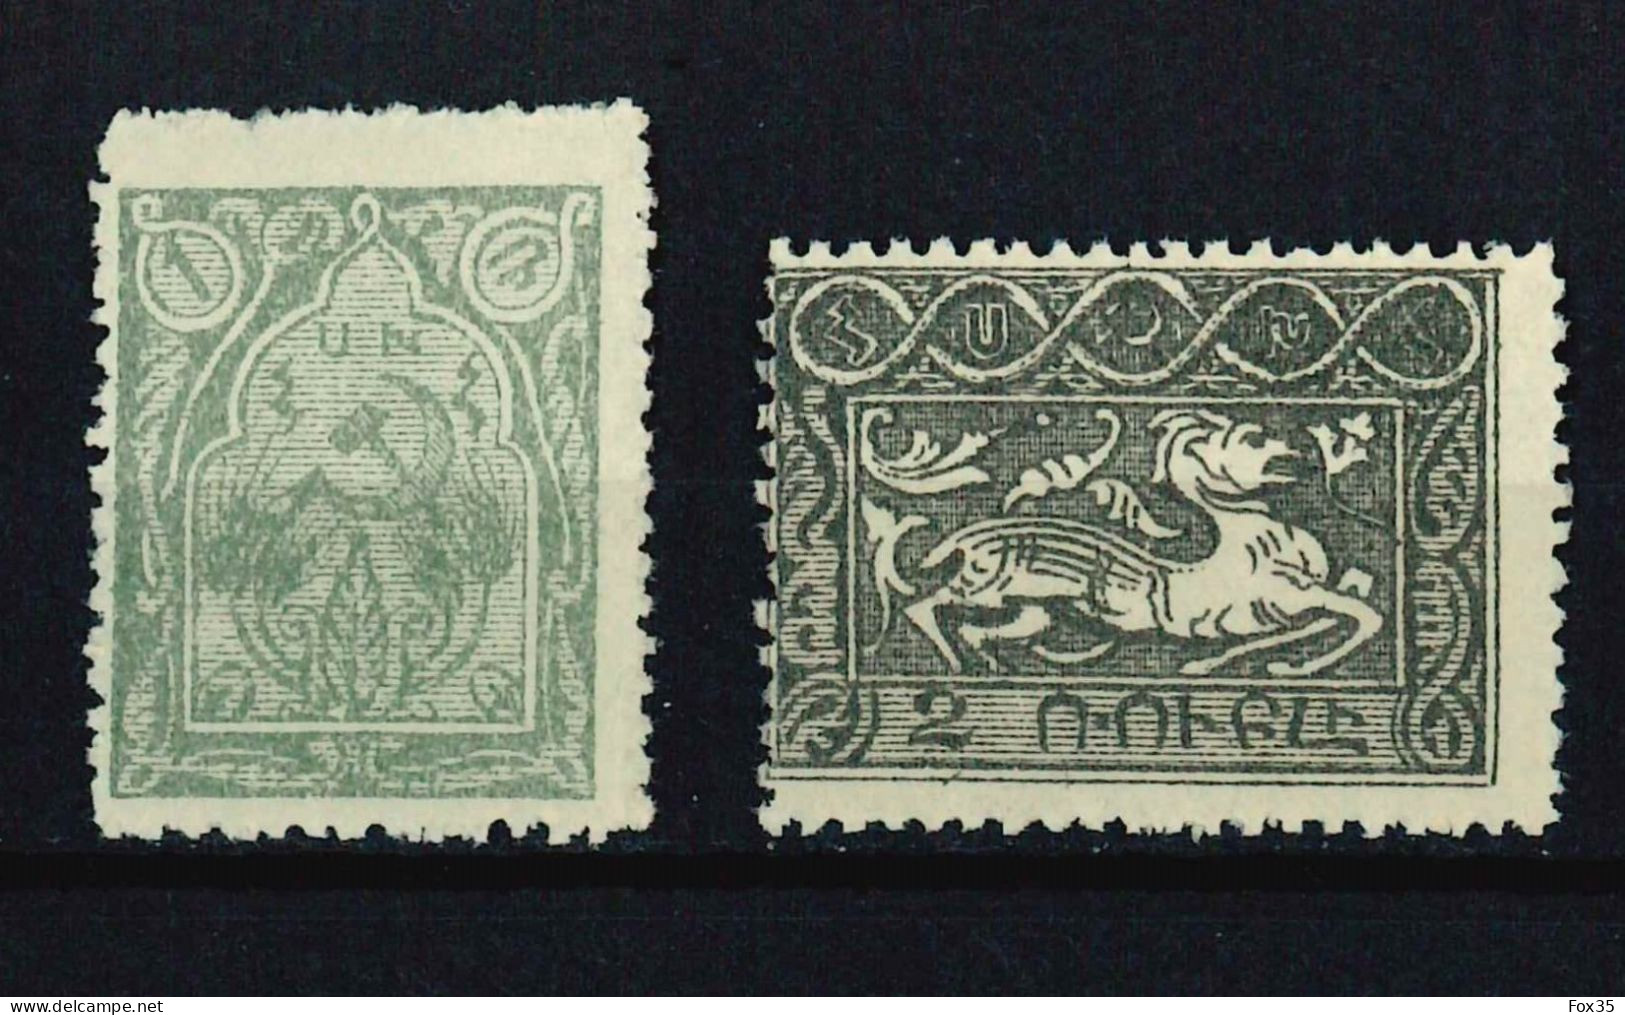 Armenia 1919-1923, 1921 First Constantinople Pictorials Issue, 'complete' Set, Perforated, Sold As Genuine, CV 48€ - Arménie